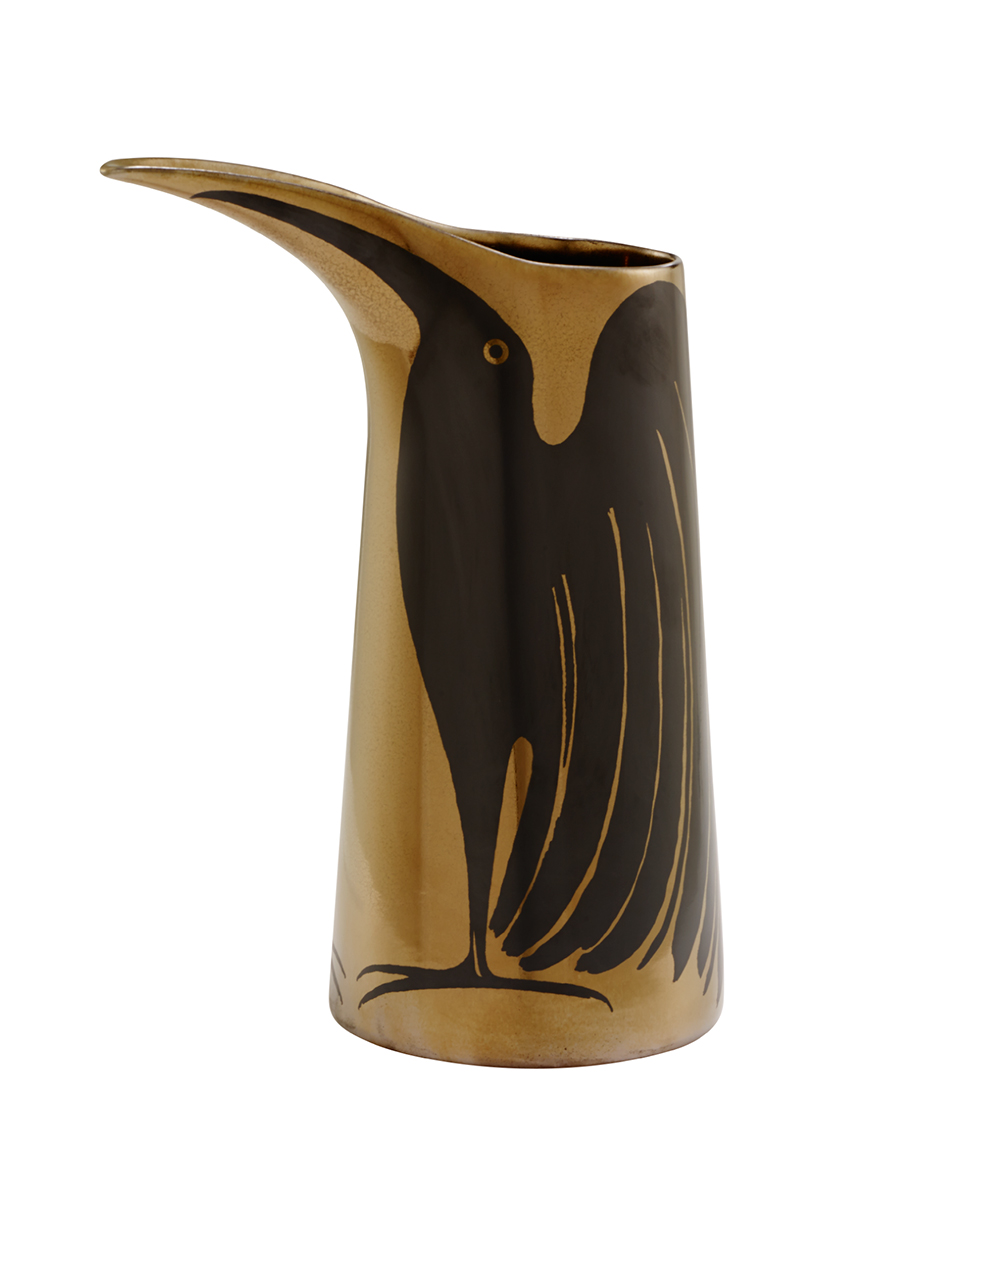 Ligne Roset LES OISEAUX Vase with a Black Bird silhouette in Gloss-Copper enameled ceramic (designed by Pascal Mourgue for Ligne Roset)